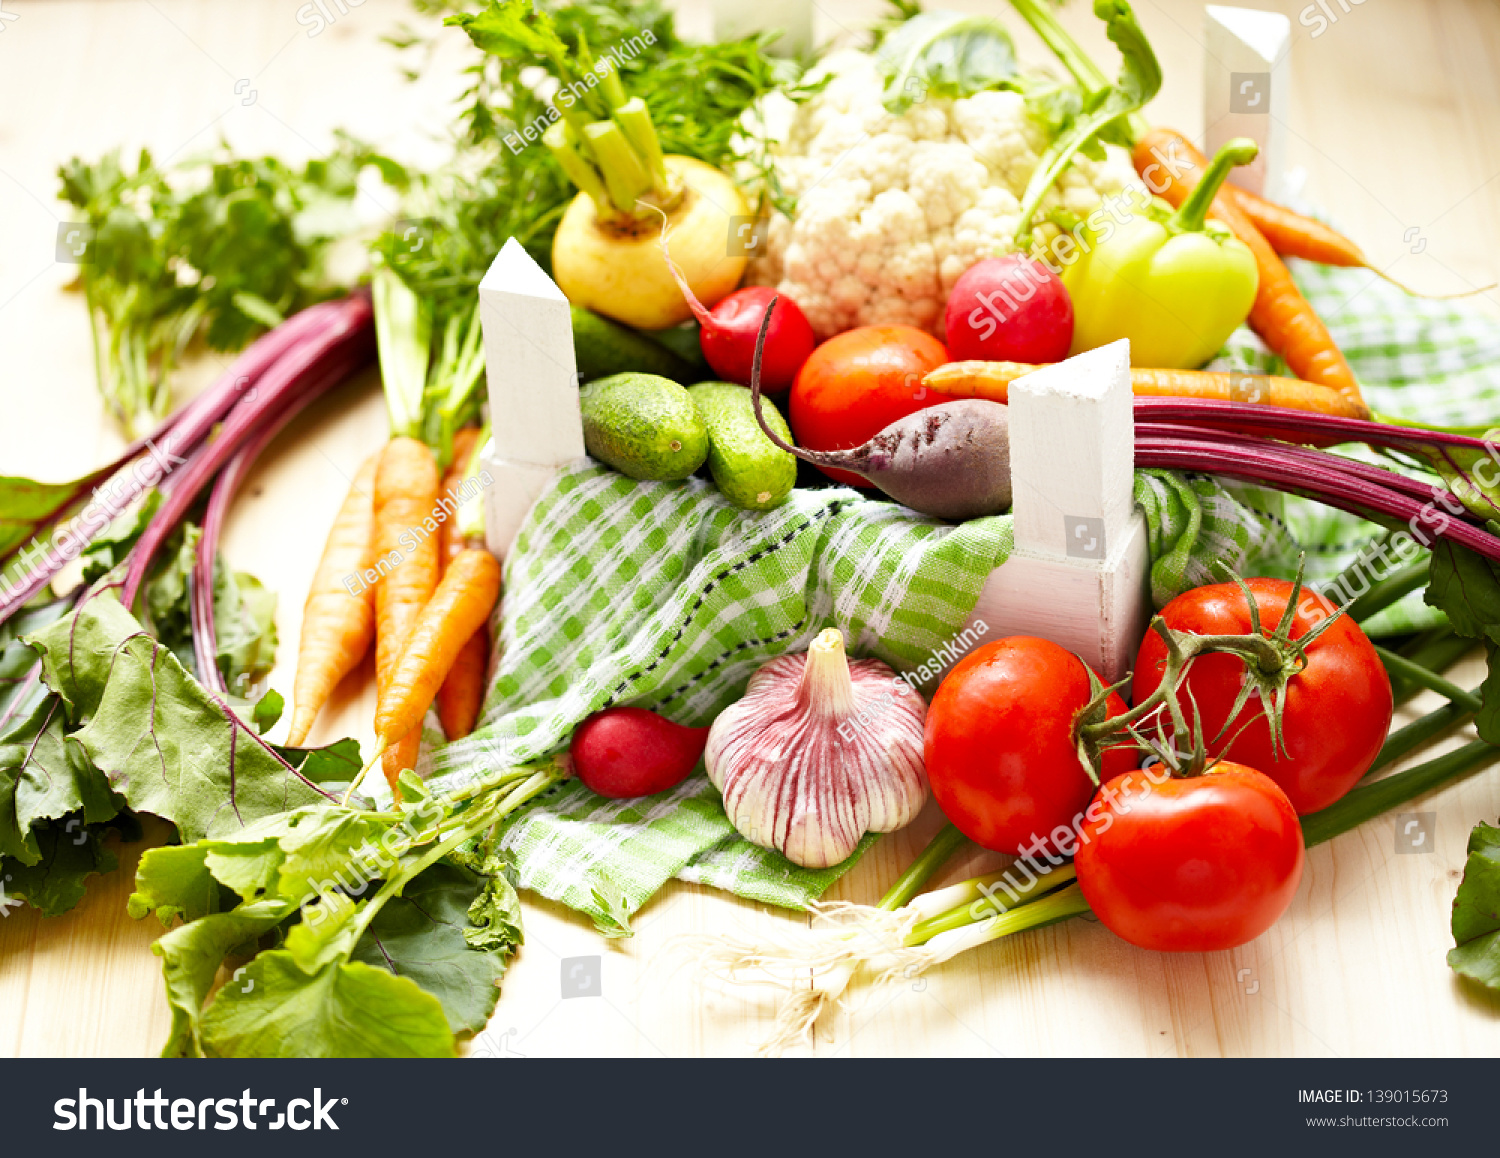 Fresh Vegetables in a Box #139015673